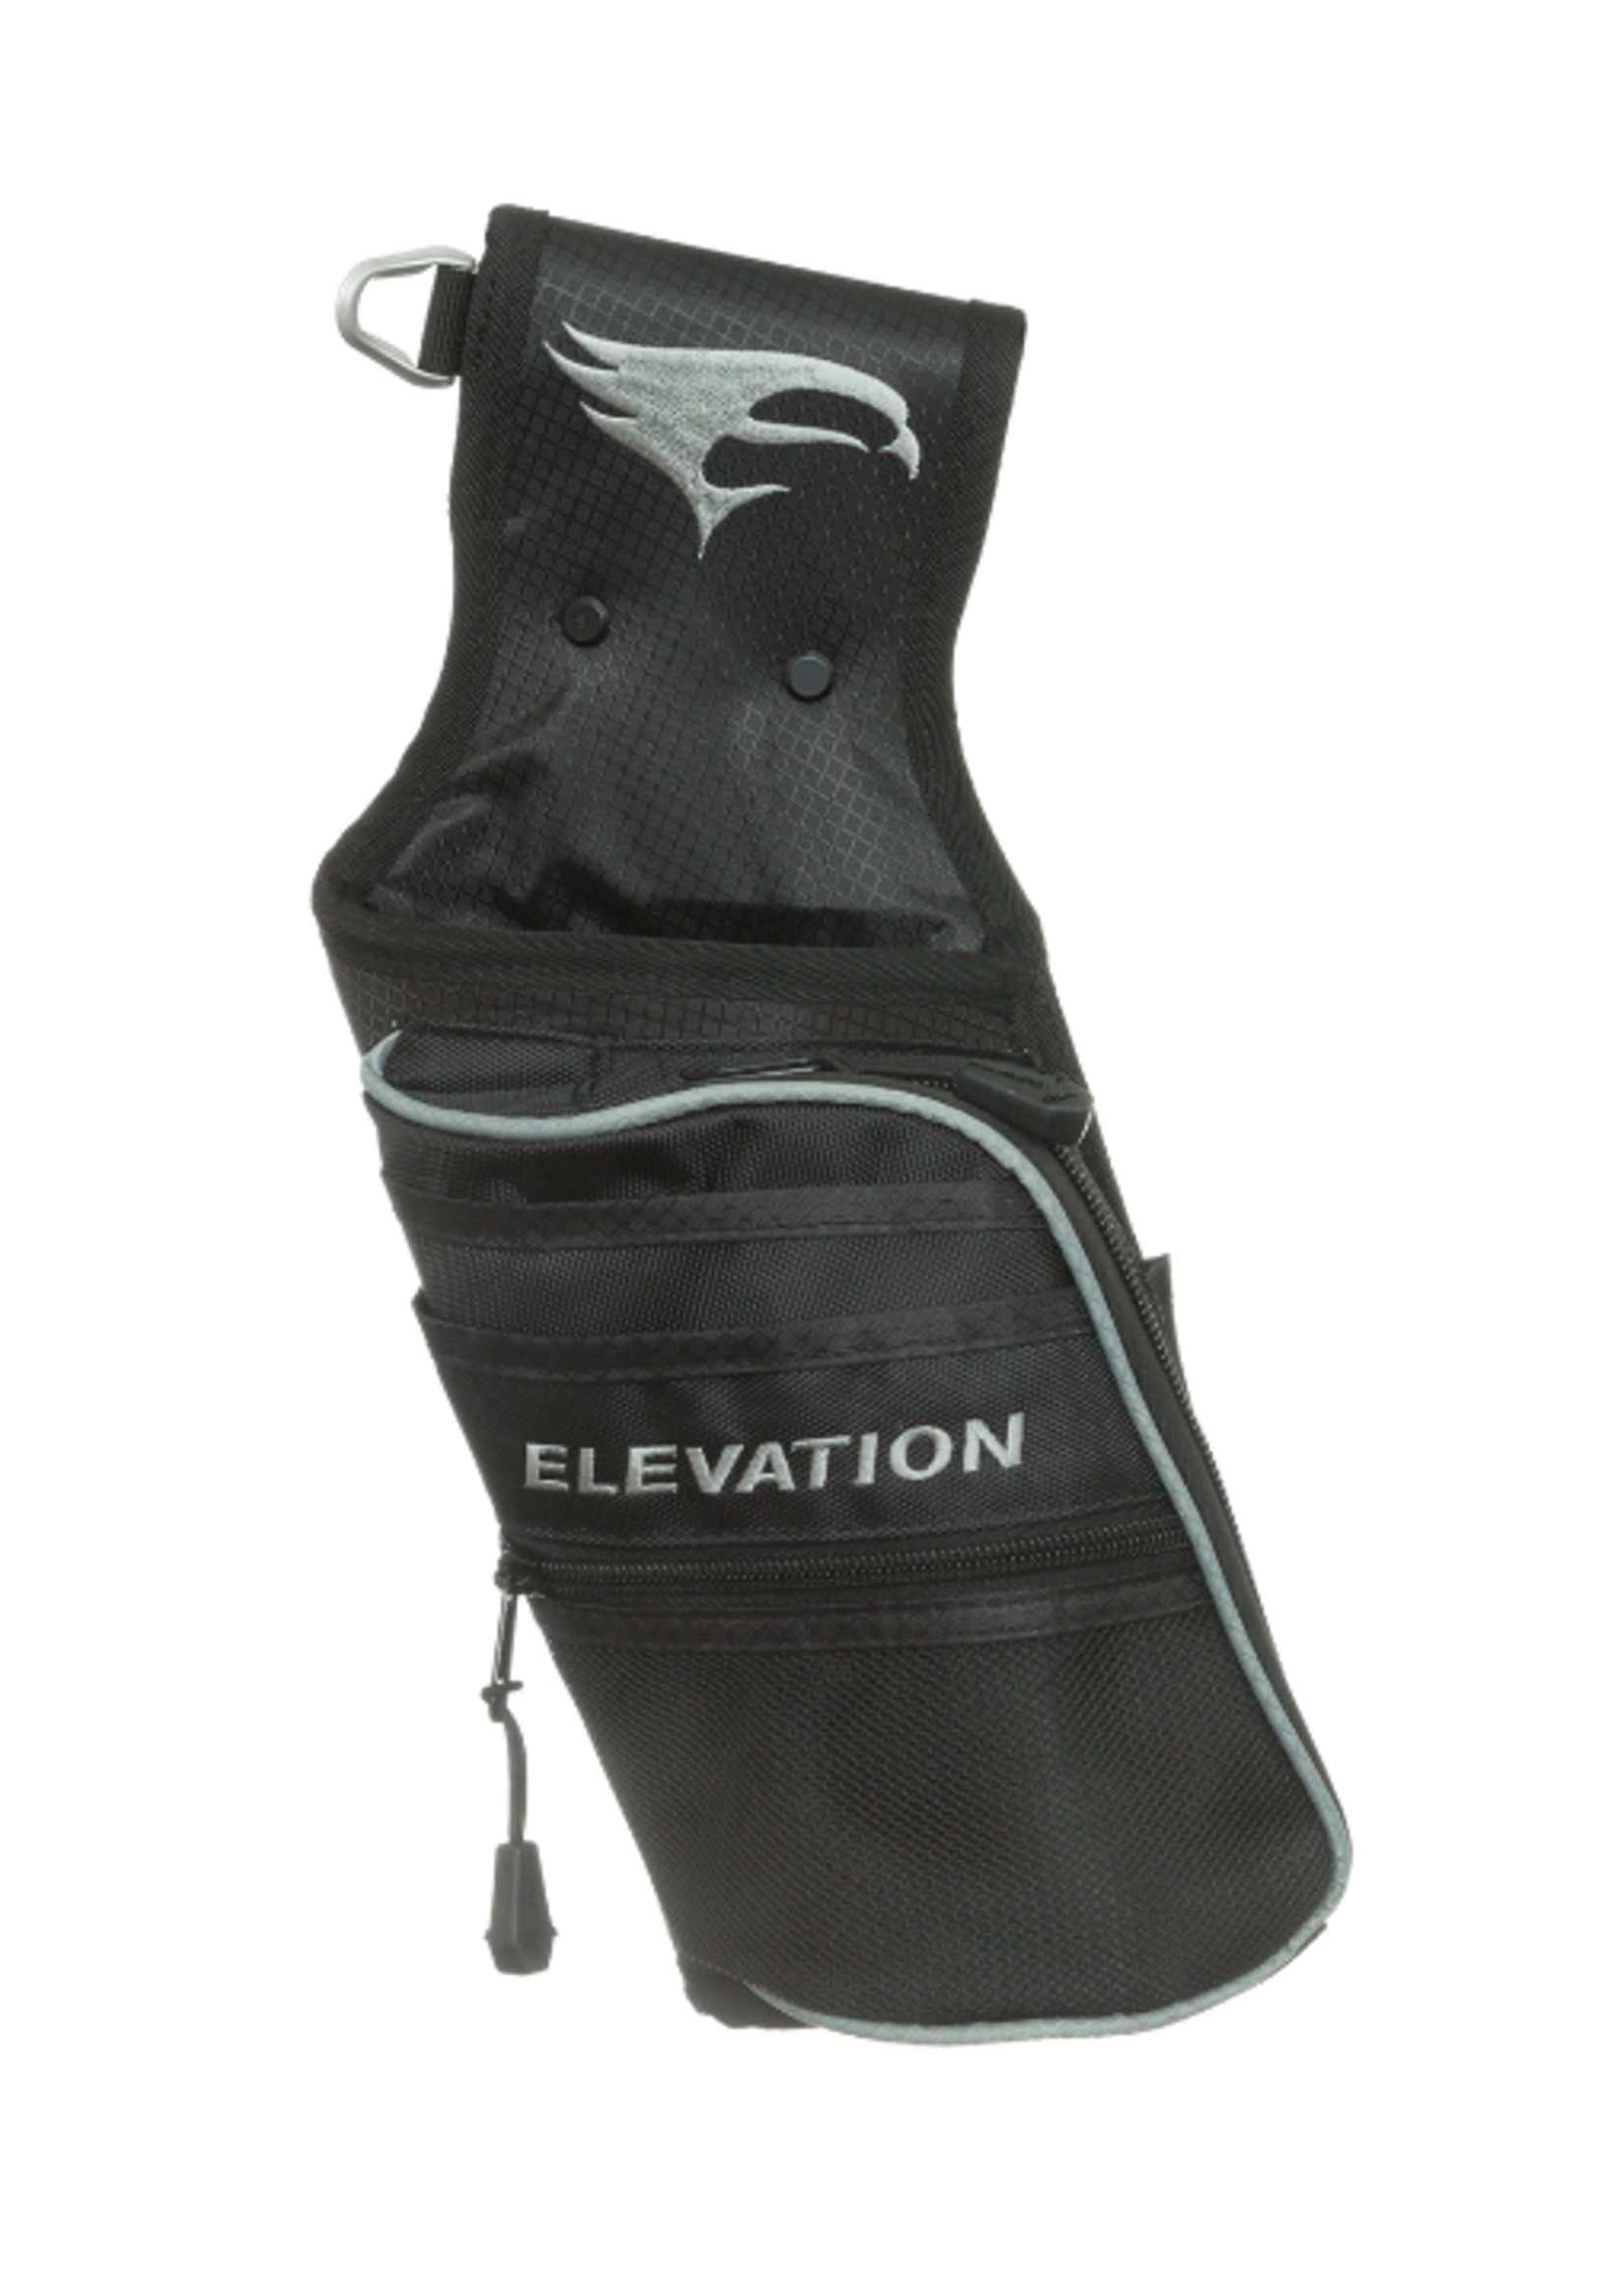 elevation Elevation Nerve Youth Edition Field Quiver